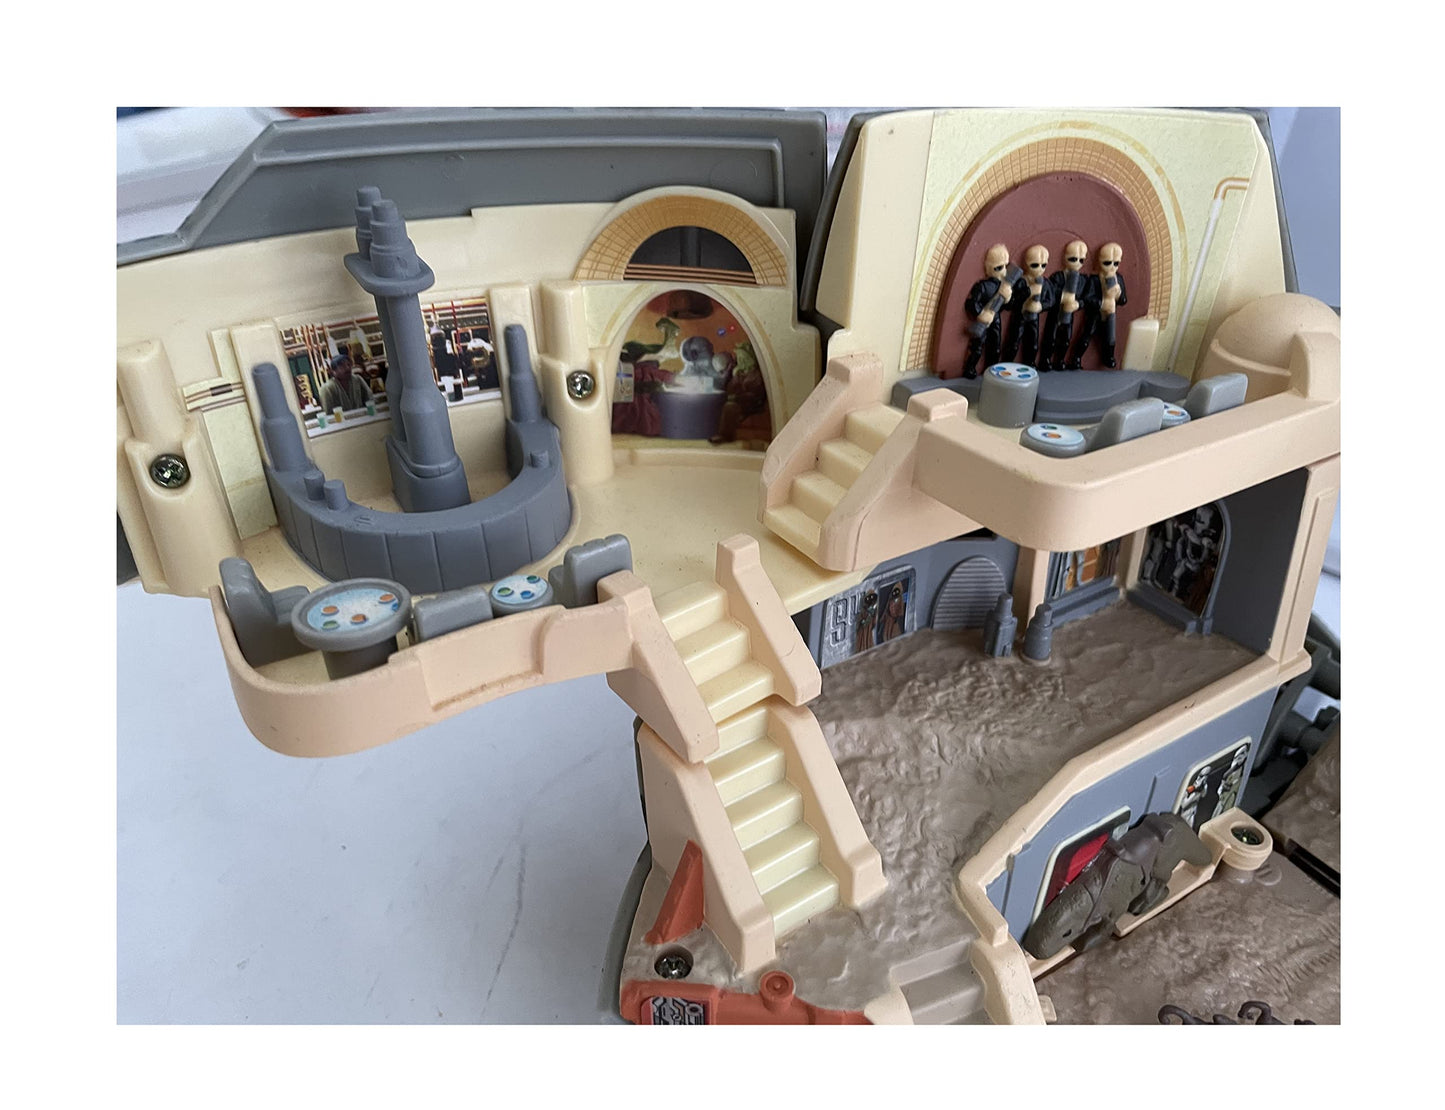 Vintage 1993 Star Wars A New Hope Micro Machines Double Takes Death Star Action Play Set Double Action Transforming Into Tatooine - In The Original Box